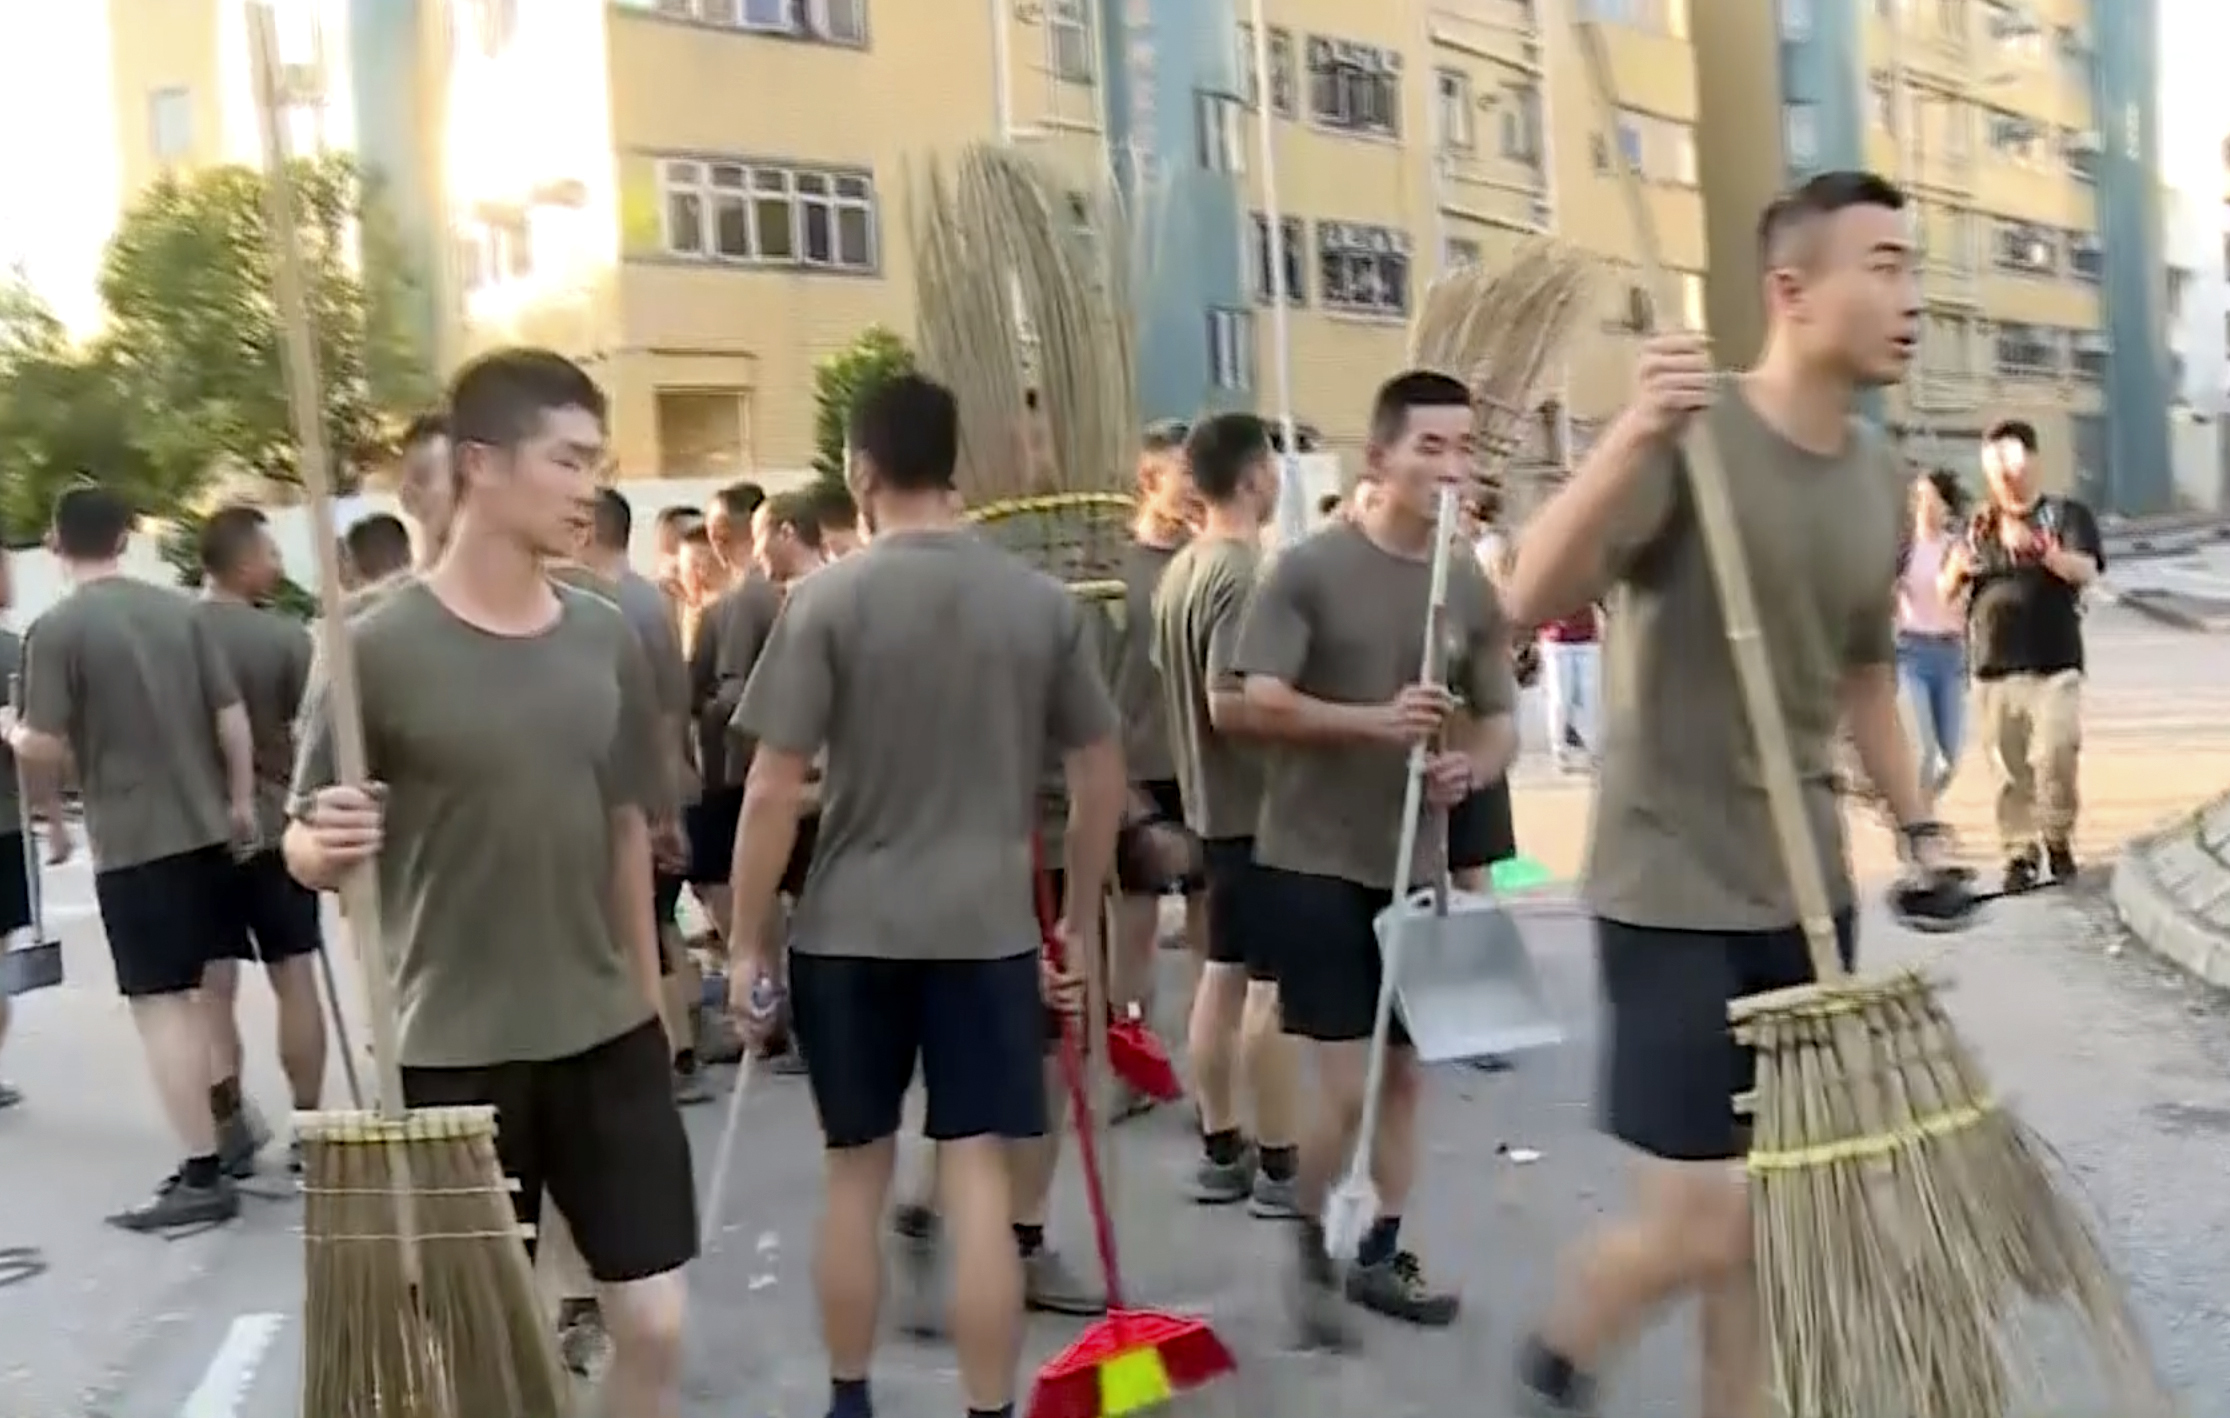 In this image made from video, People’s Liberation Army soldiers, with brooms, arrive to clean up the protest area at Hong Kong Baptist University in Hong Kong, Saturday, Nov. 16, 2019. Troops from the Chinese army joined an effort to clean up debris outside the university, which was the site of clashes this week. (Television Broadcasts Limited Hong Kong via AP)